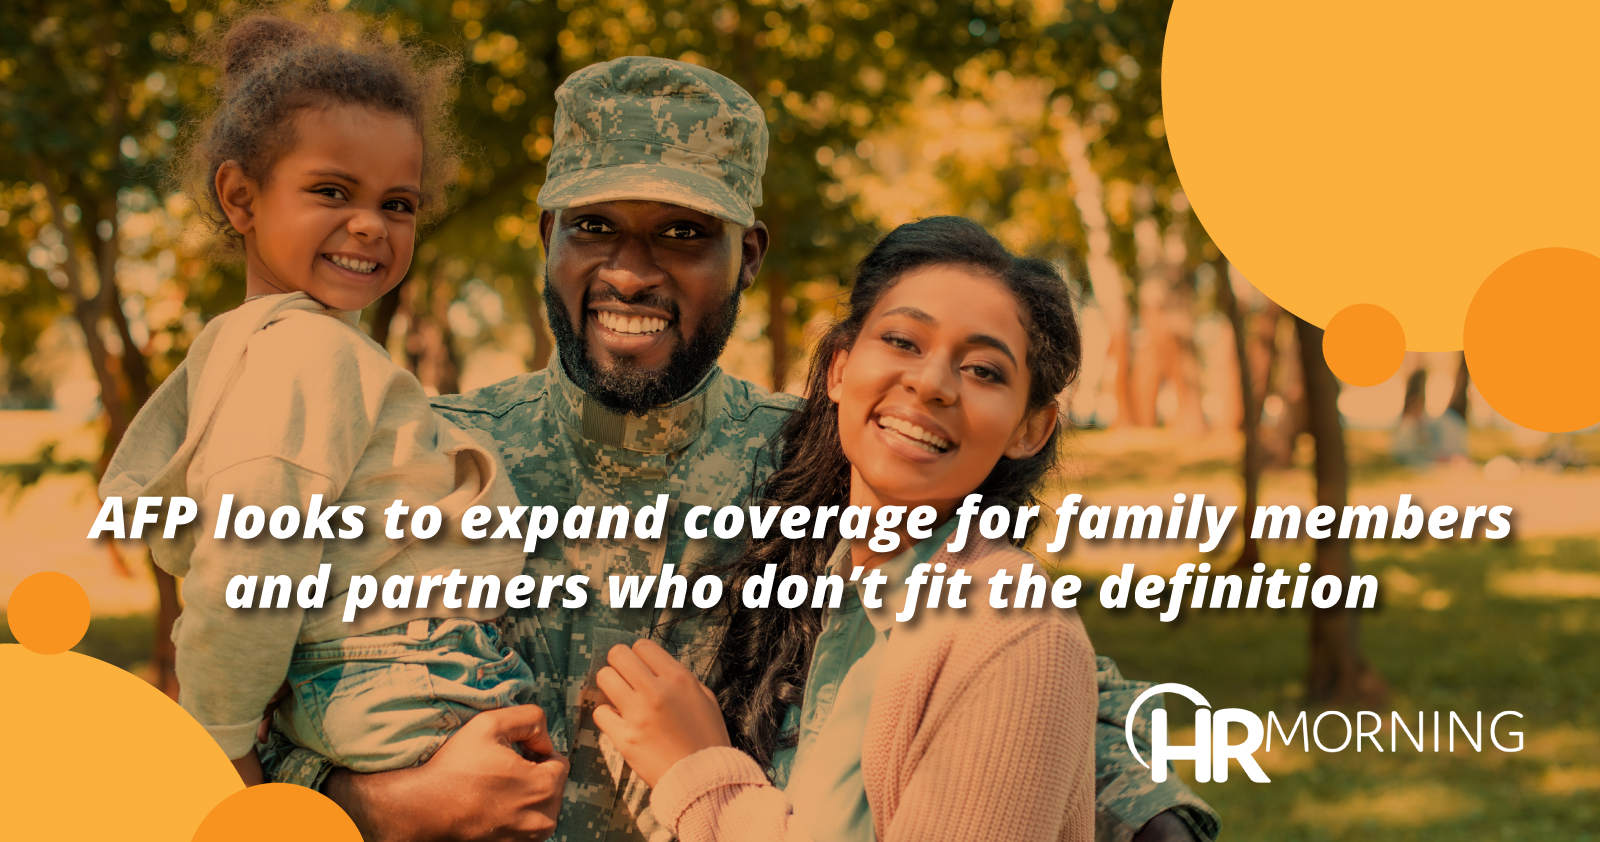 afp looks to expand coverage for family members and partners who do not fit the definition